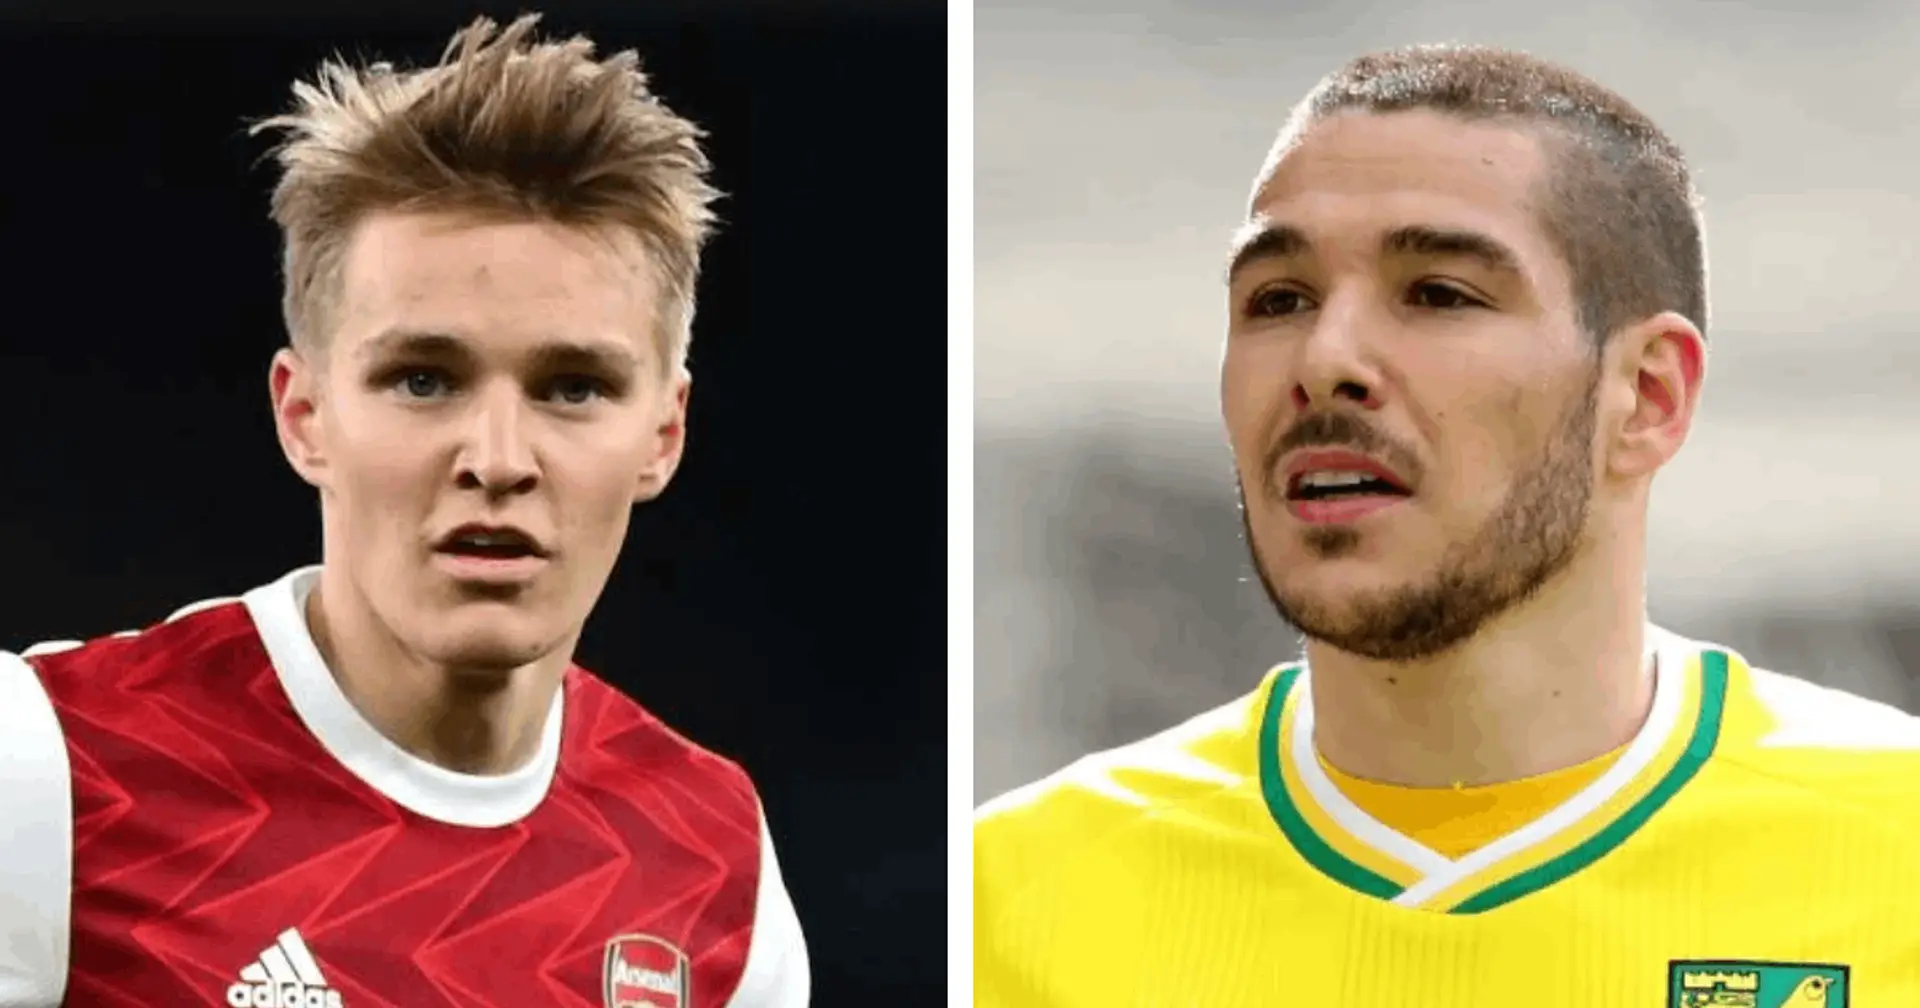 🤔 Which attacking midfielder should Arsenal target after missing out on Buendia? Odegaard or someone else? Share your views in the comments!